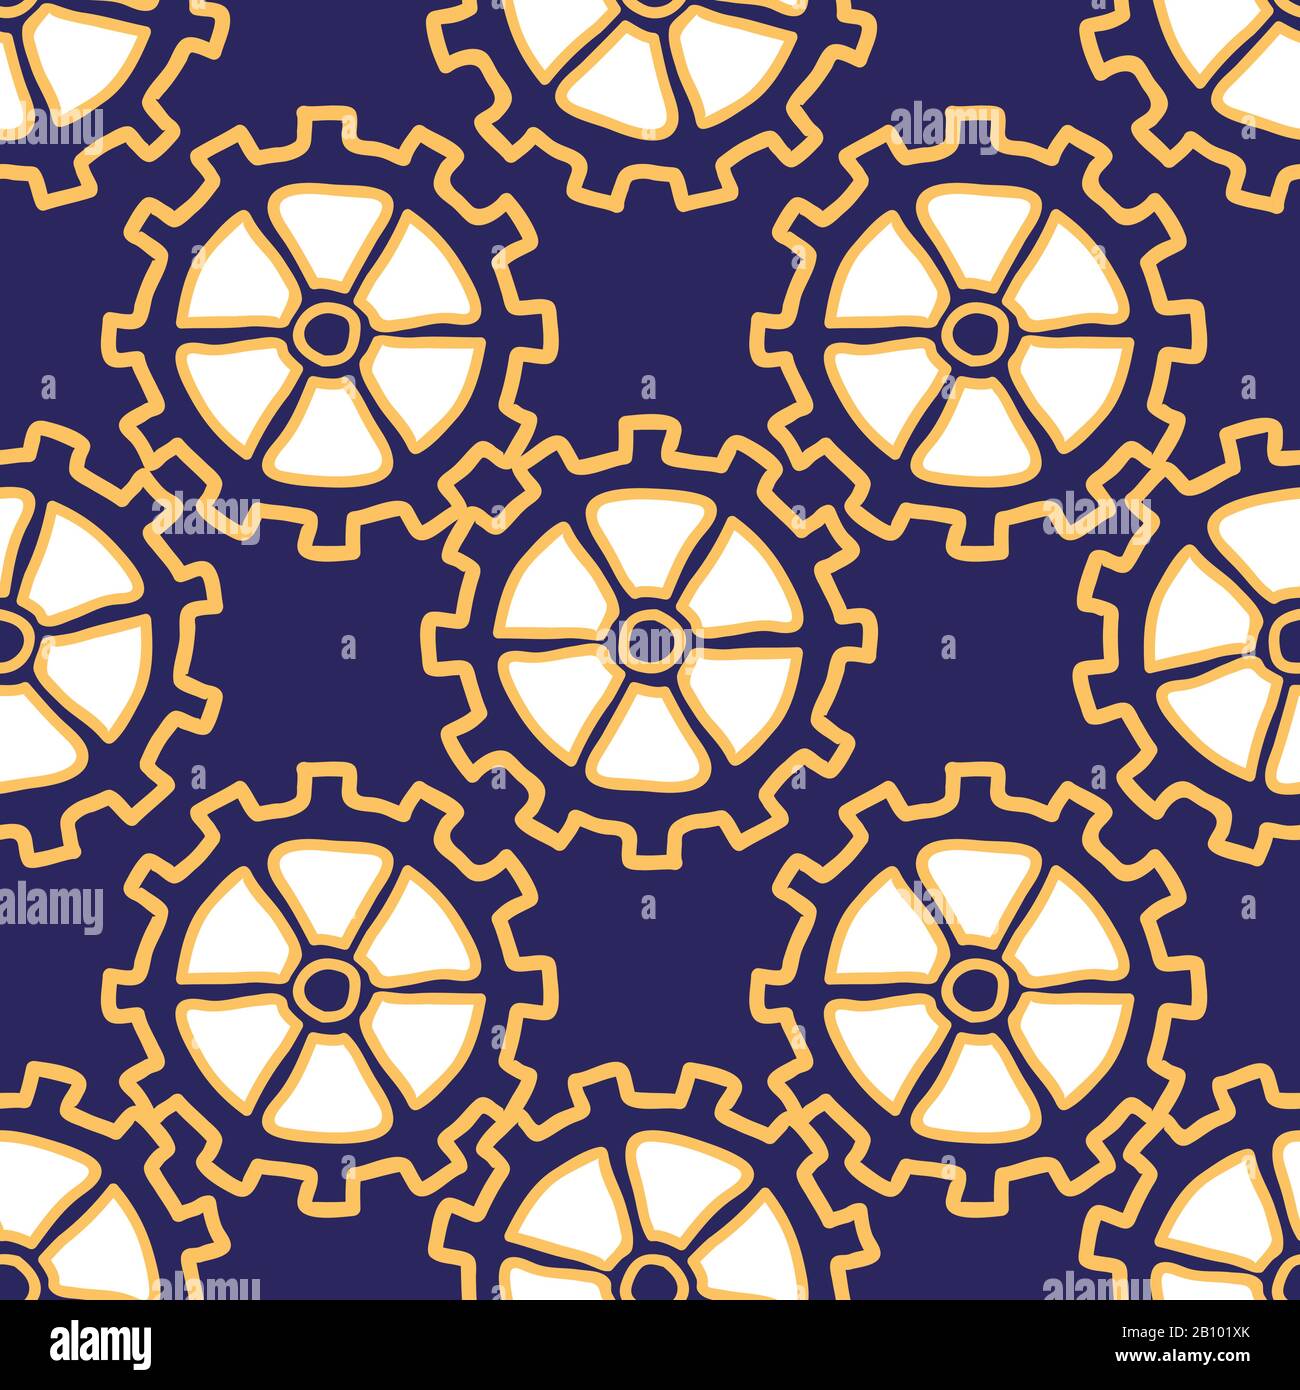 Cogs in a Wheel seamless vector repeat cog on blue background. surface pattern design Stock Vector